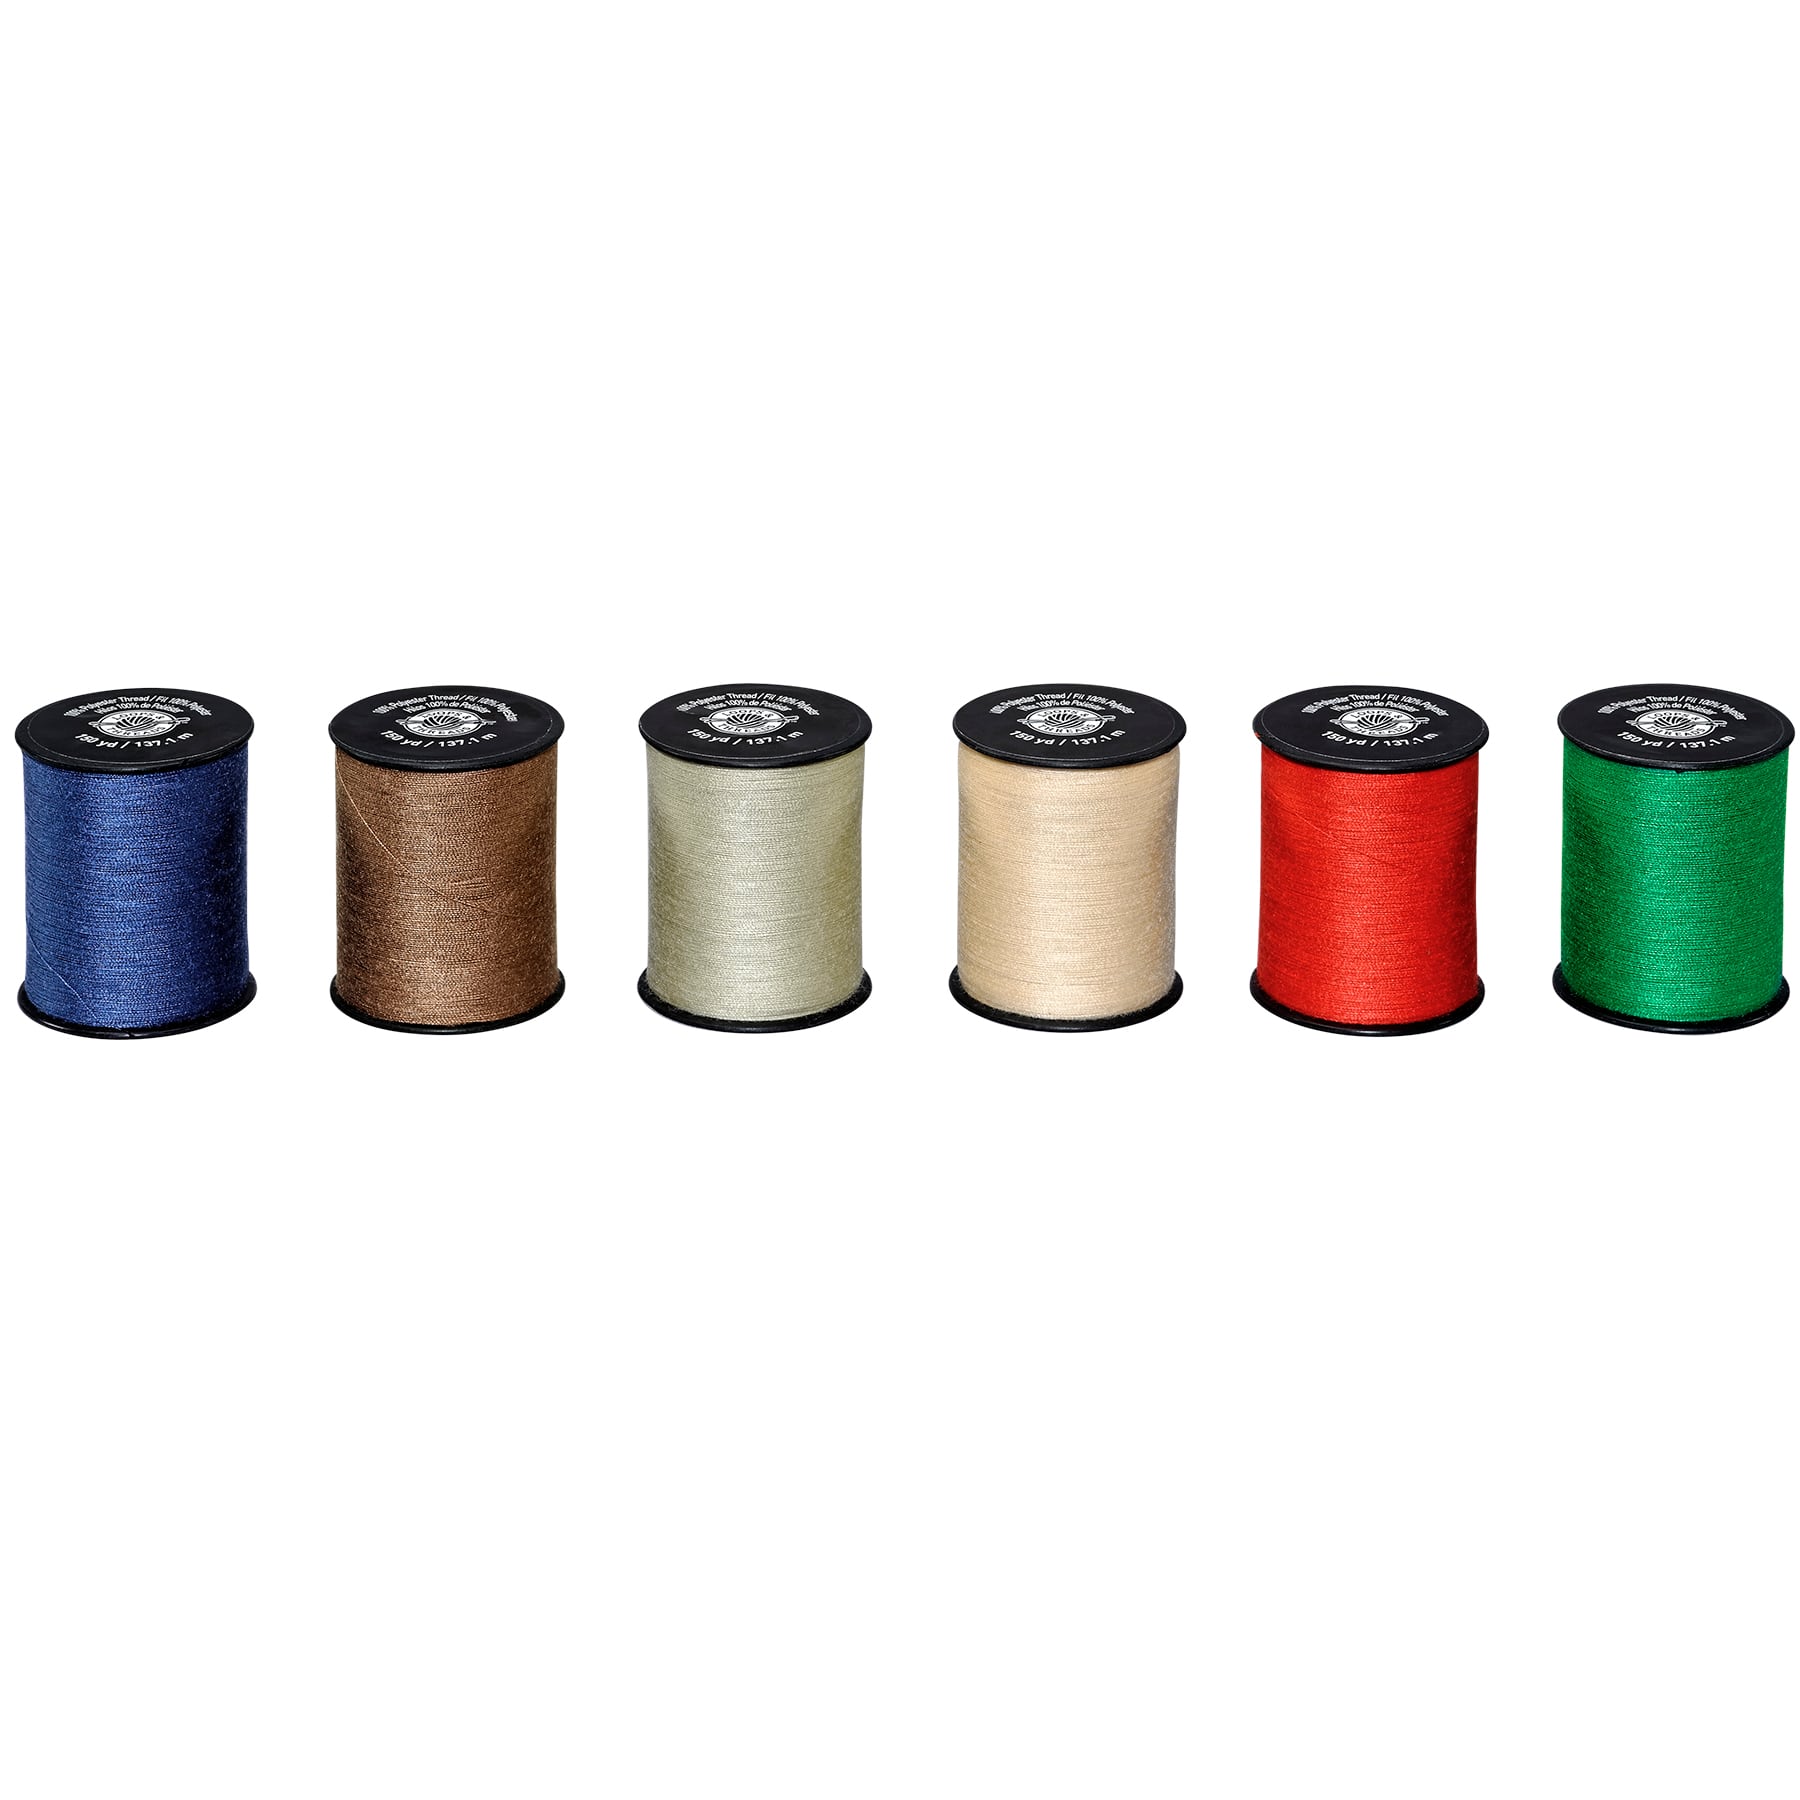 Singer Polyester Hand Sewing Thread Spools, Sewing